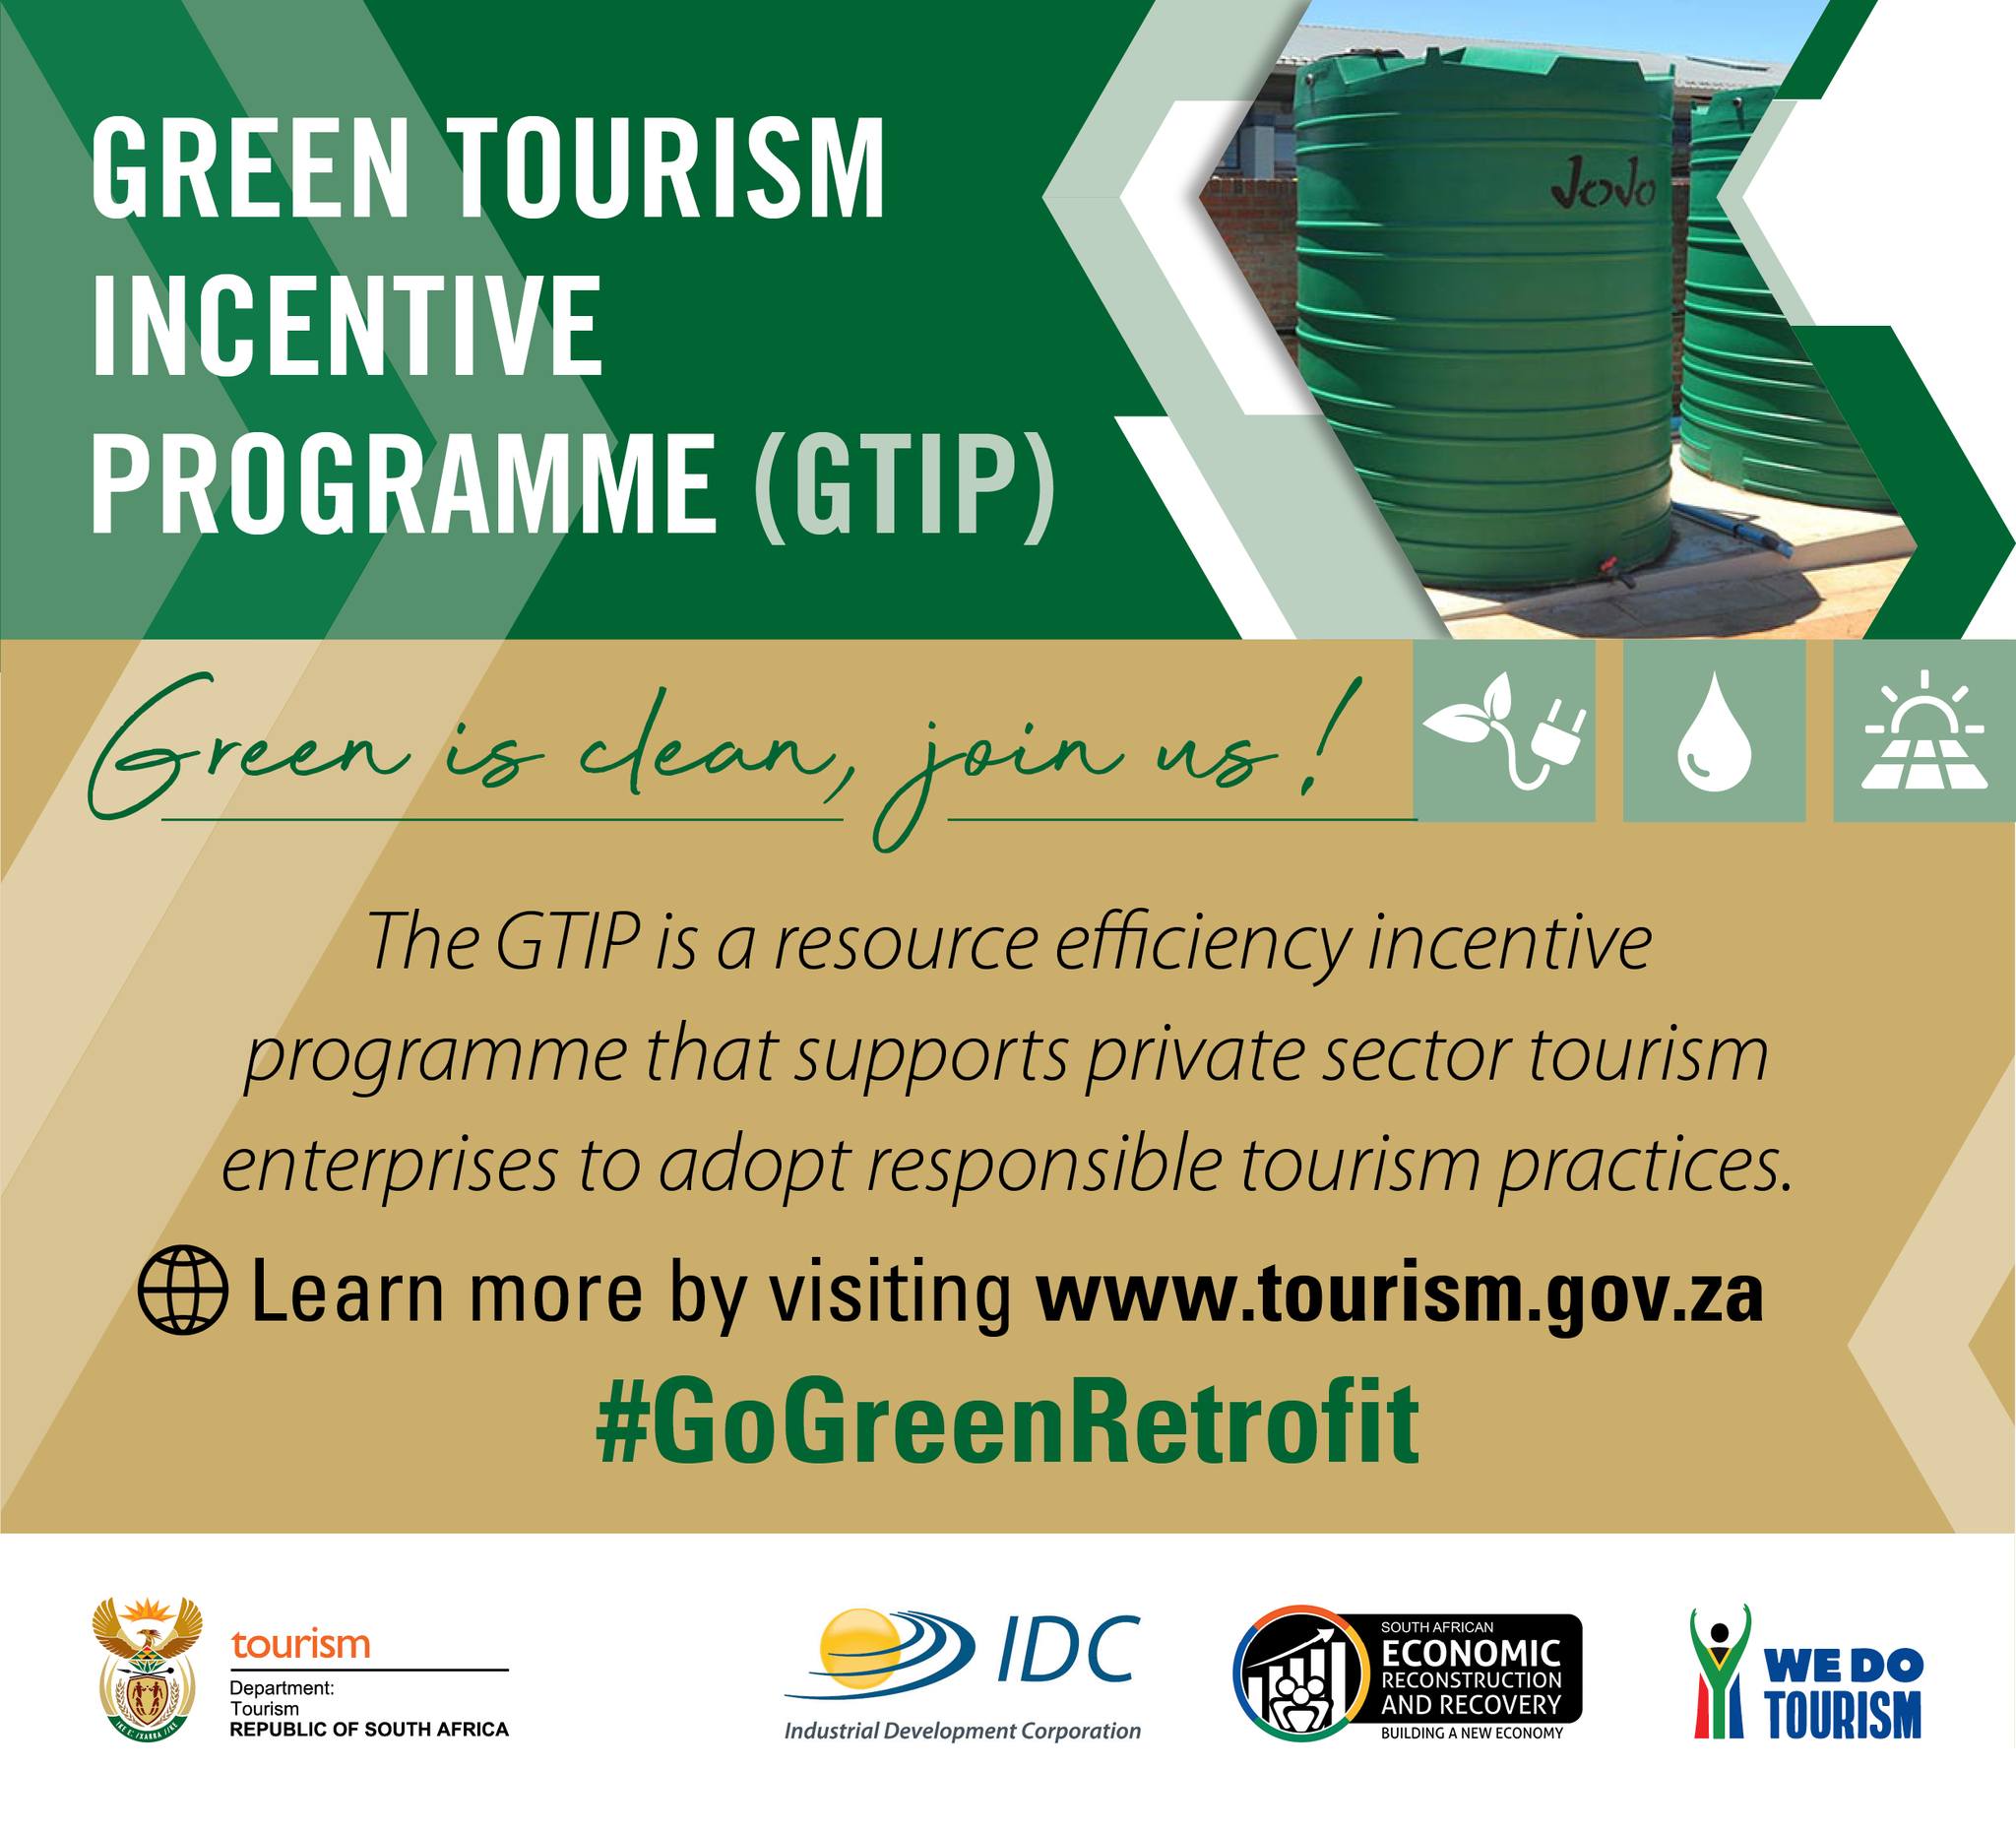 Minister Patricia de Lille to visit Green Tourism Incentive Programme beneficiary, Houw Hoek Hotel in Grabouw